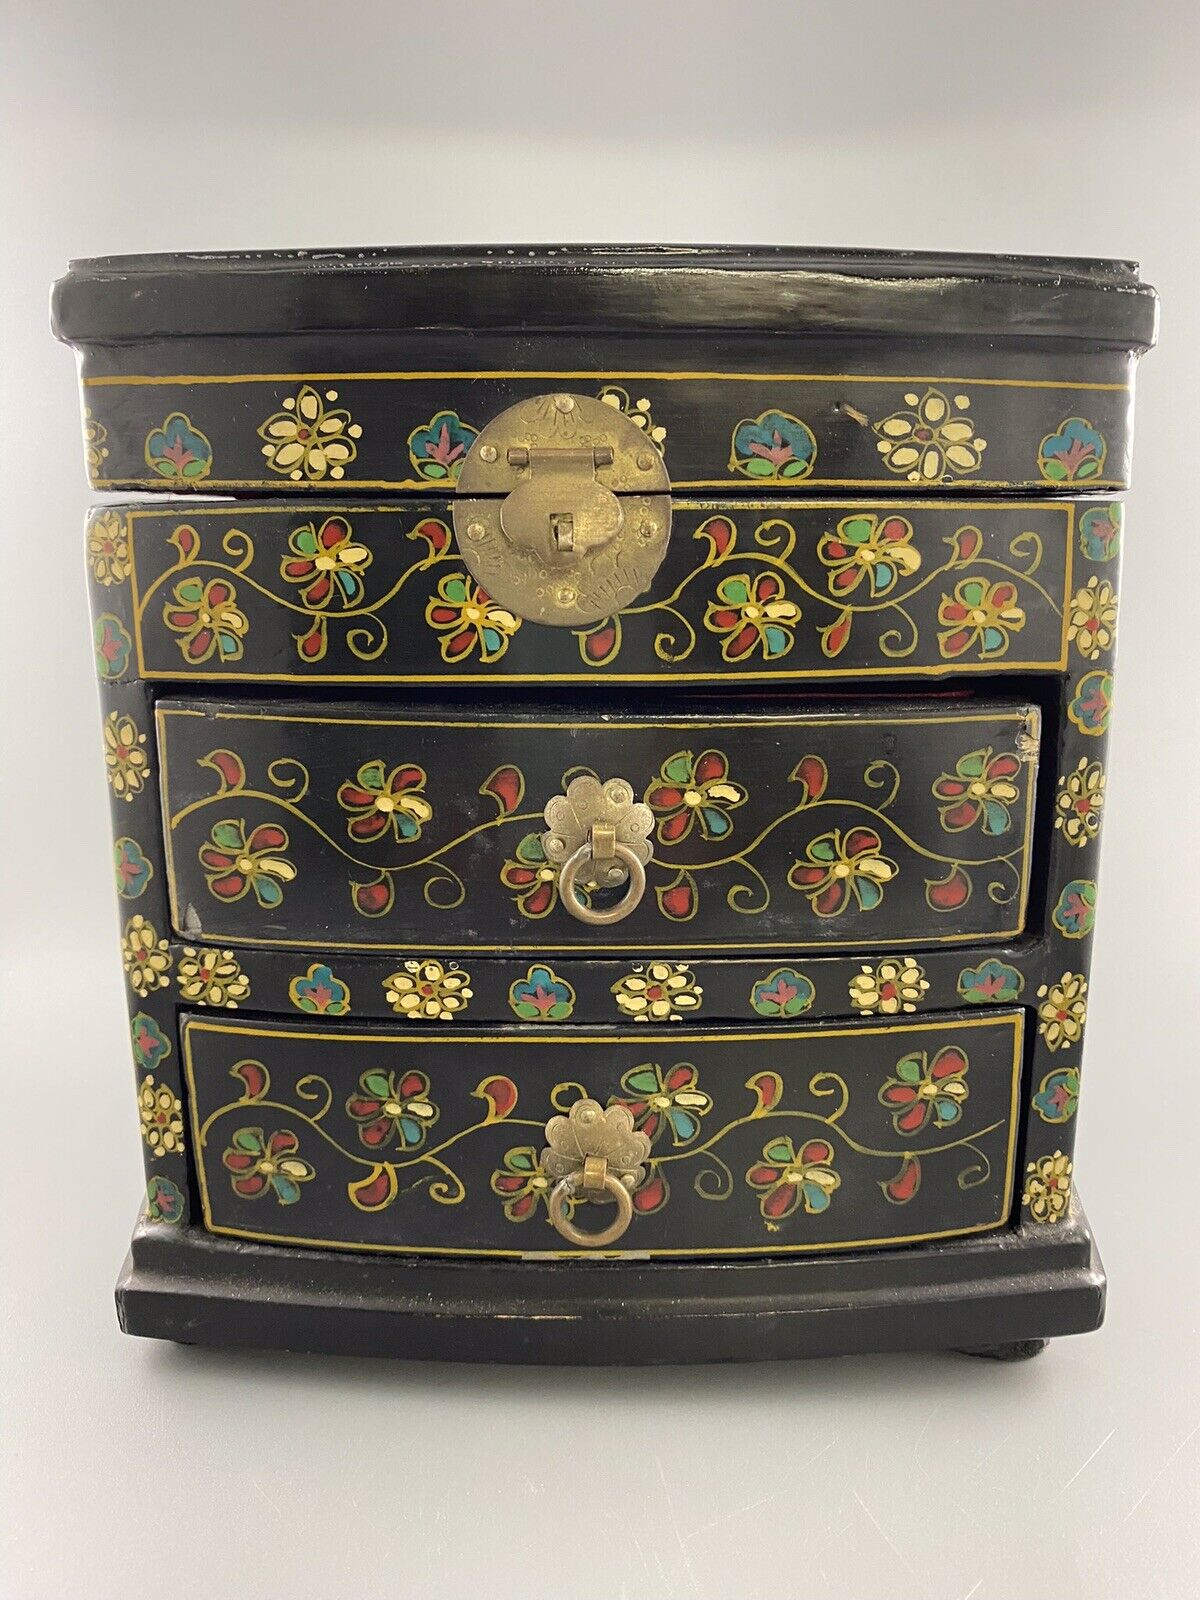 Vintage 7.5” Tall Chinese Painted Jewelry Chest Drawer Painted Black Lacquer